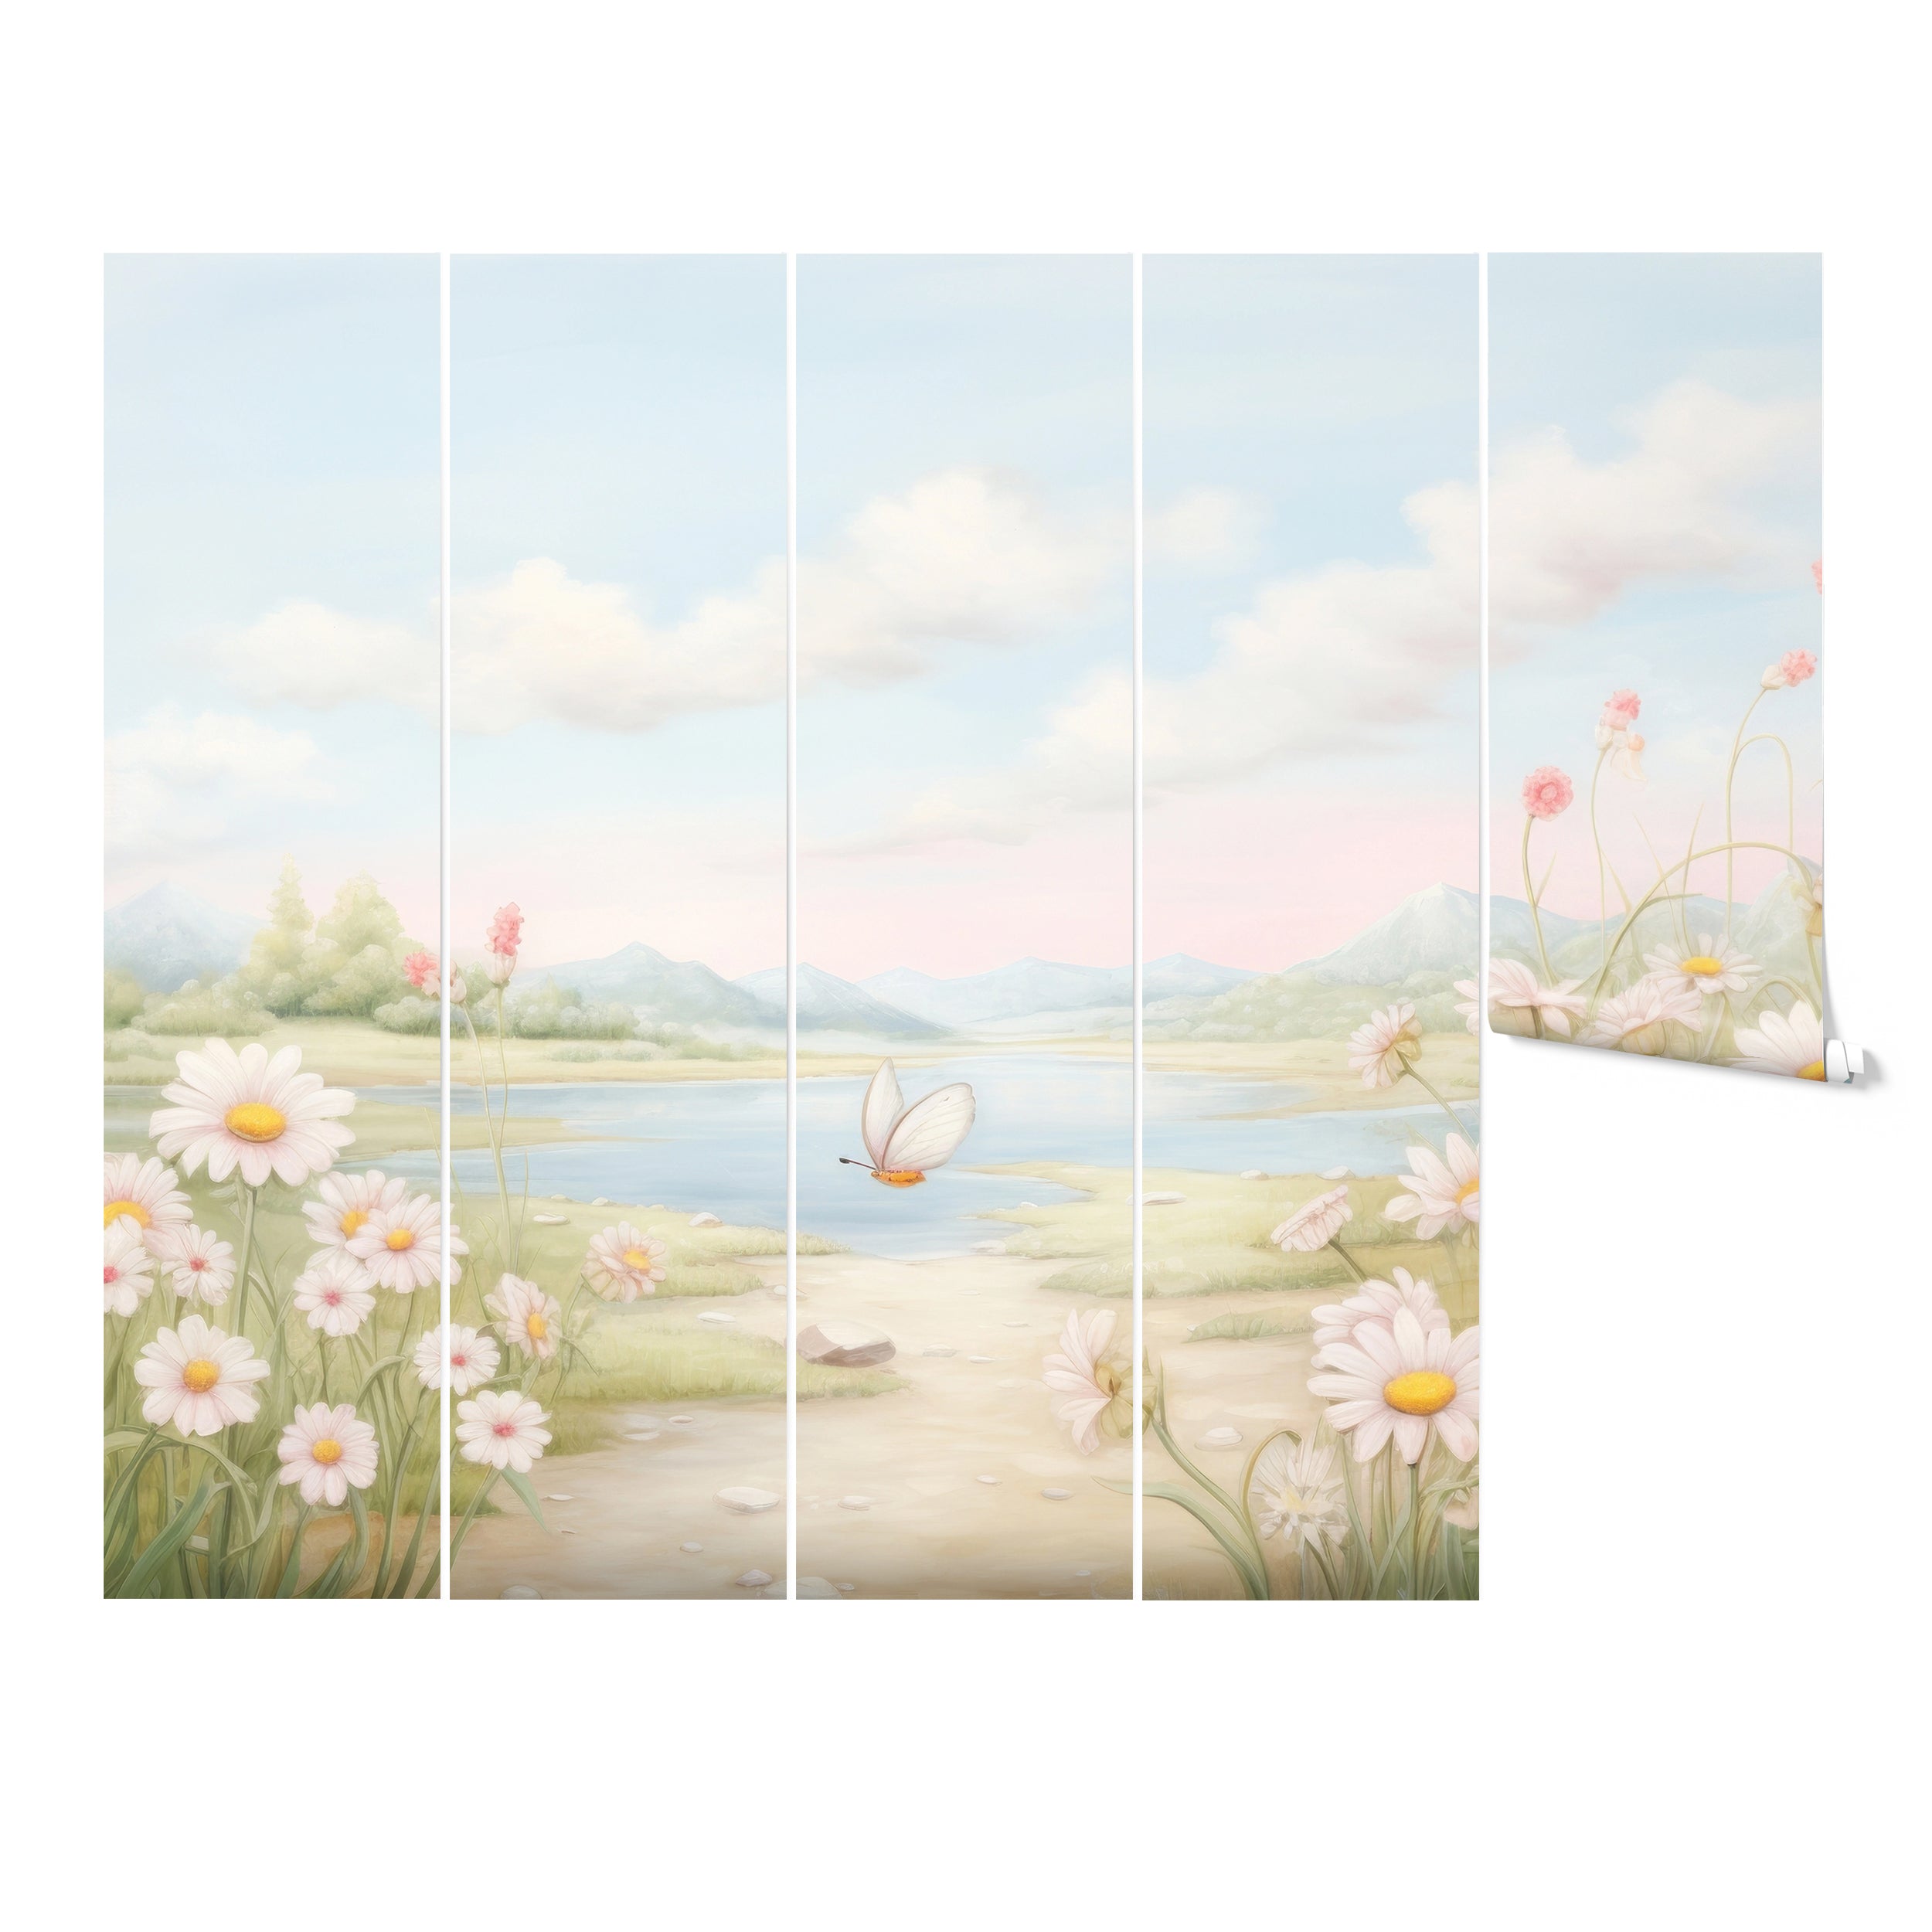 Panel display of Wildflower Valley Mural with detailed floral elements and serene landscape."